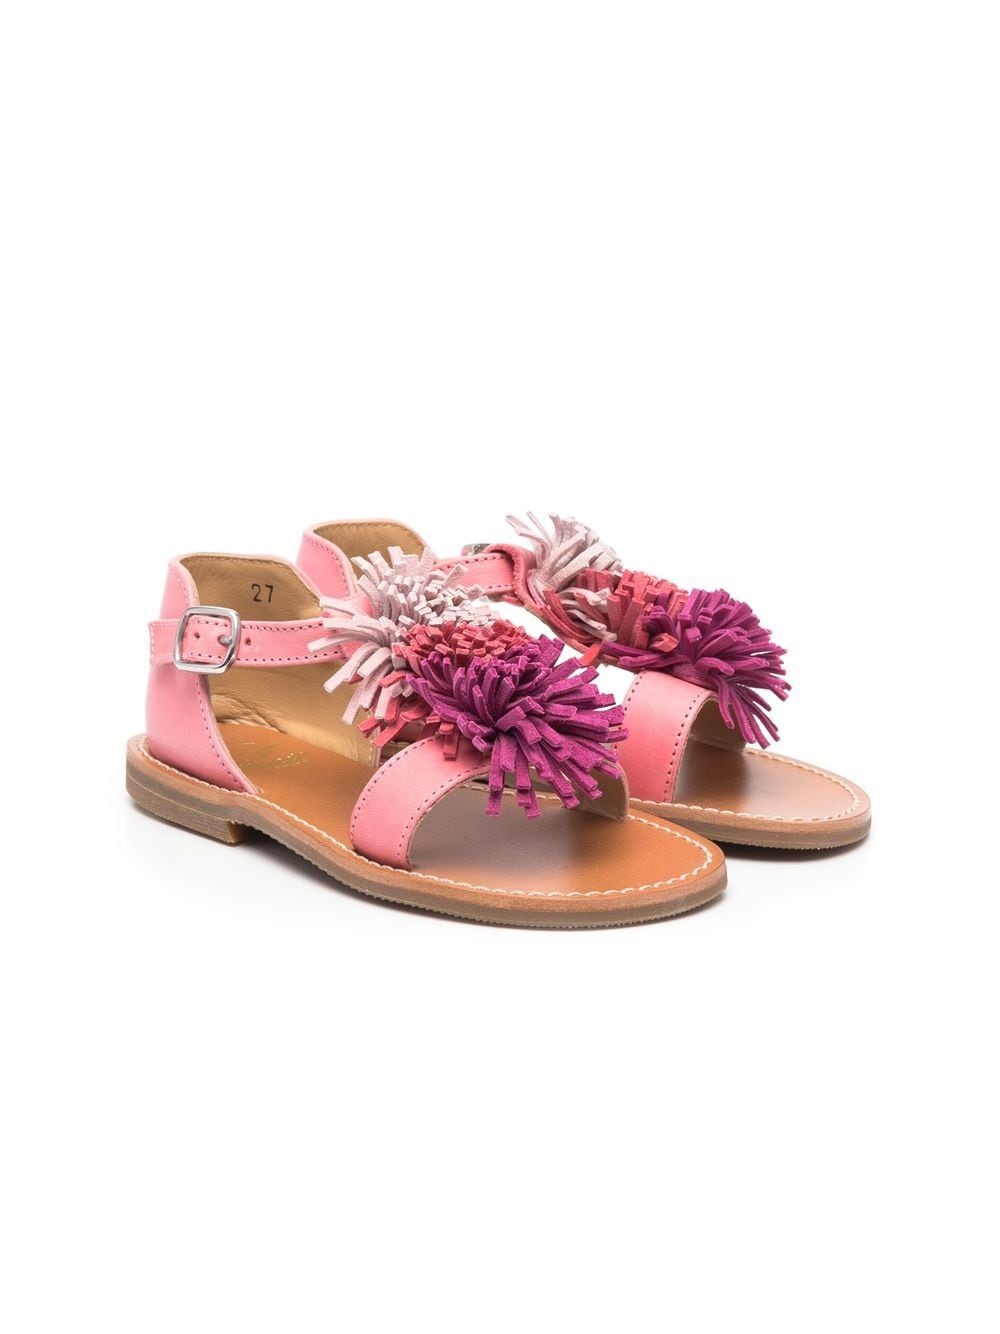 Gallucci Kids' Pompom-detail Open-toe Sandals In Pink